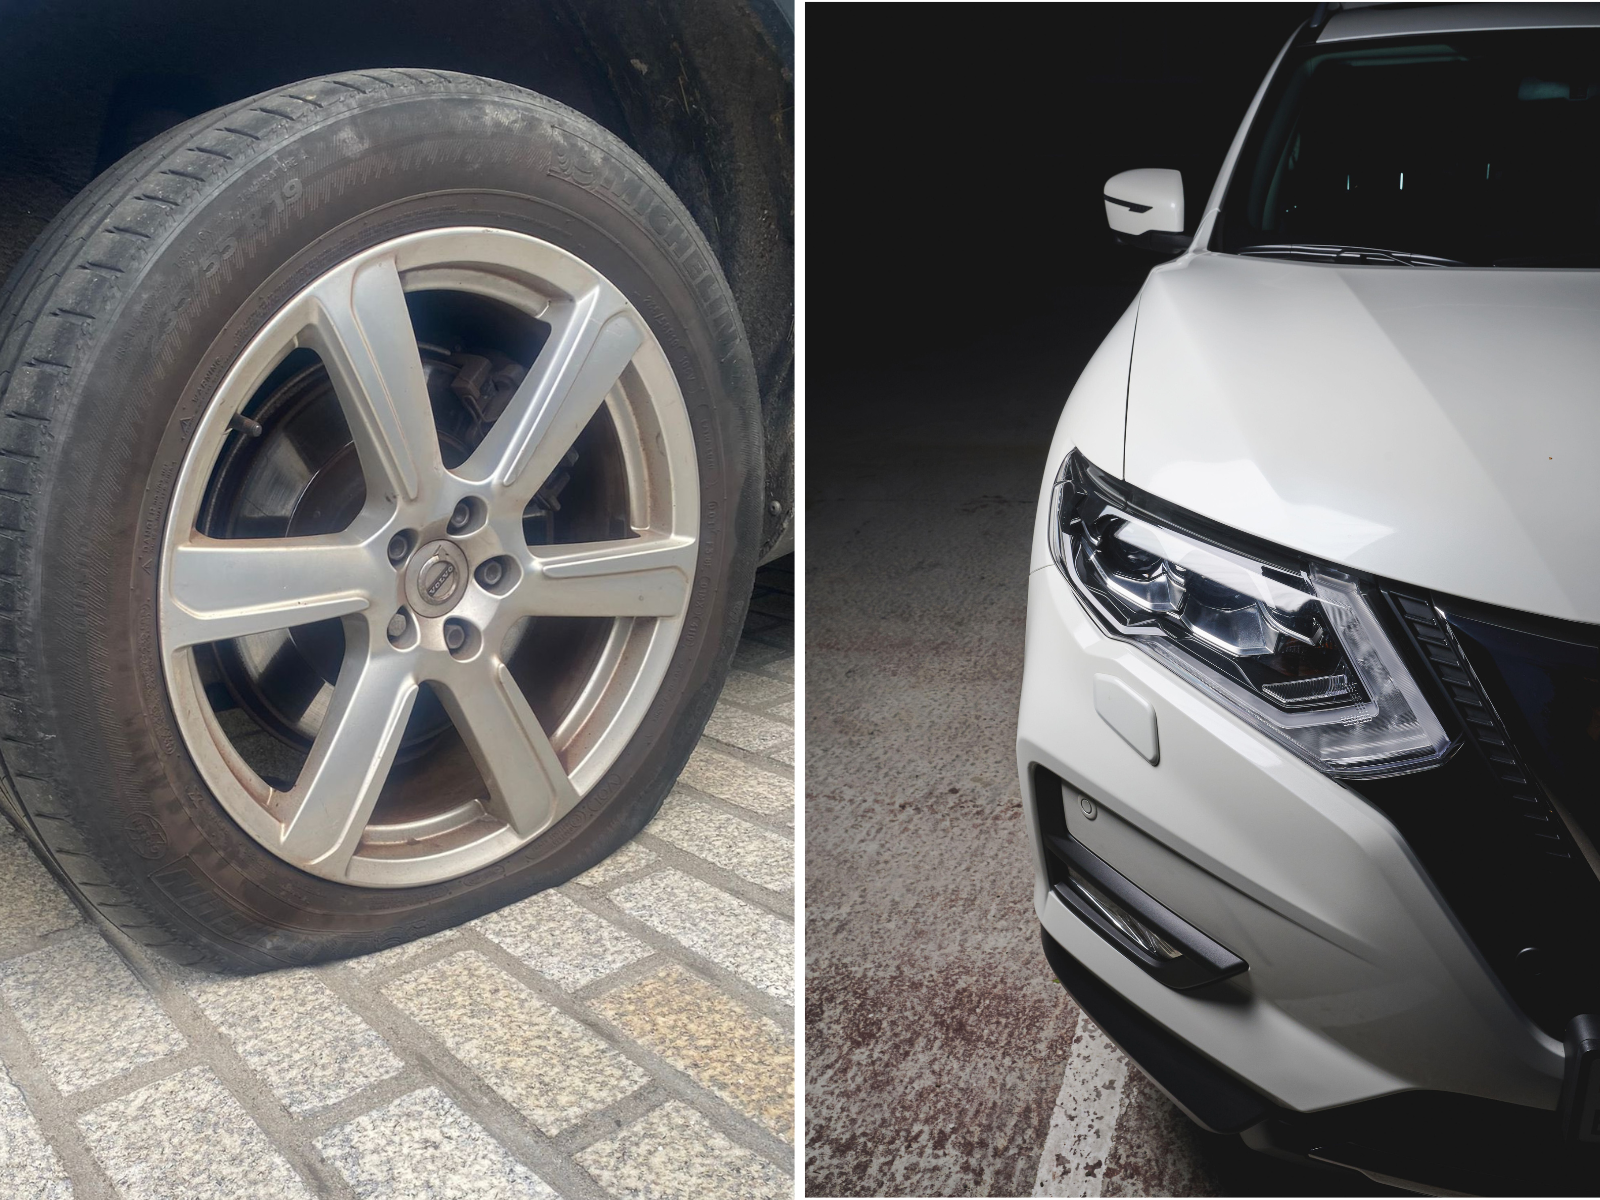 A split-screen of a slashed tyre and an SUV.